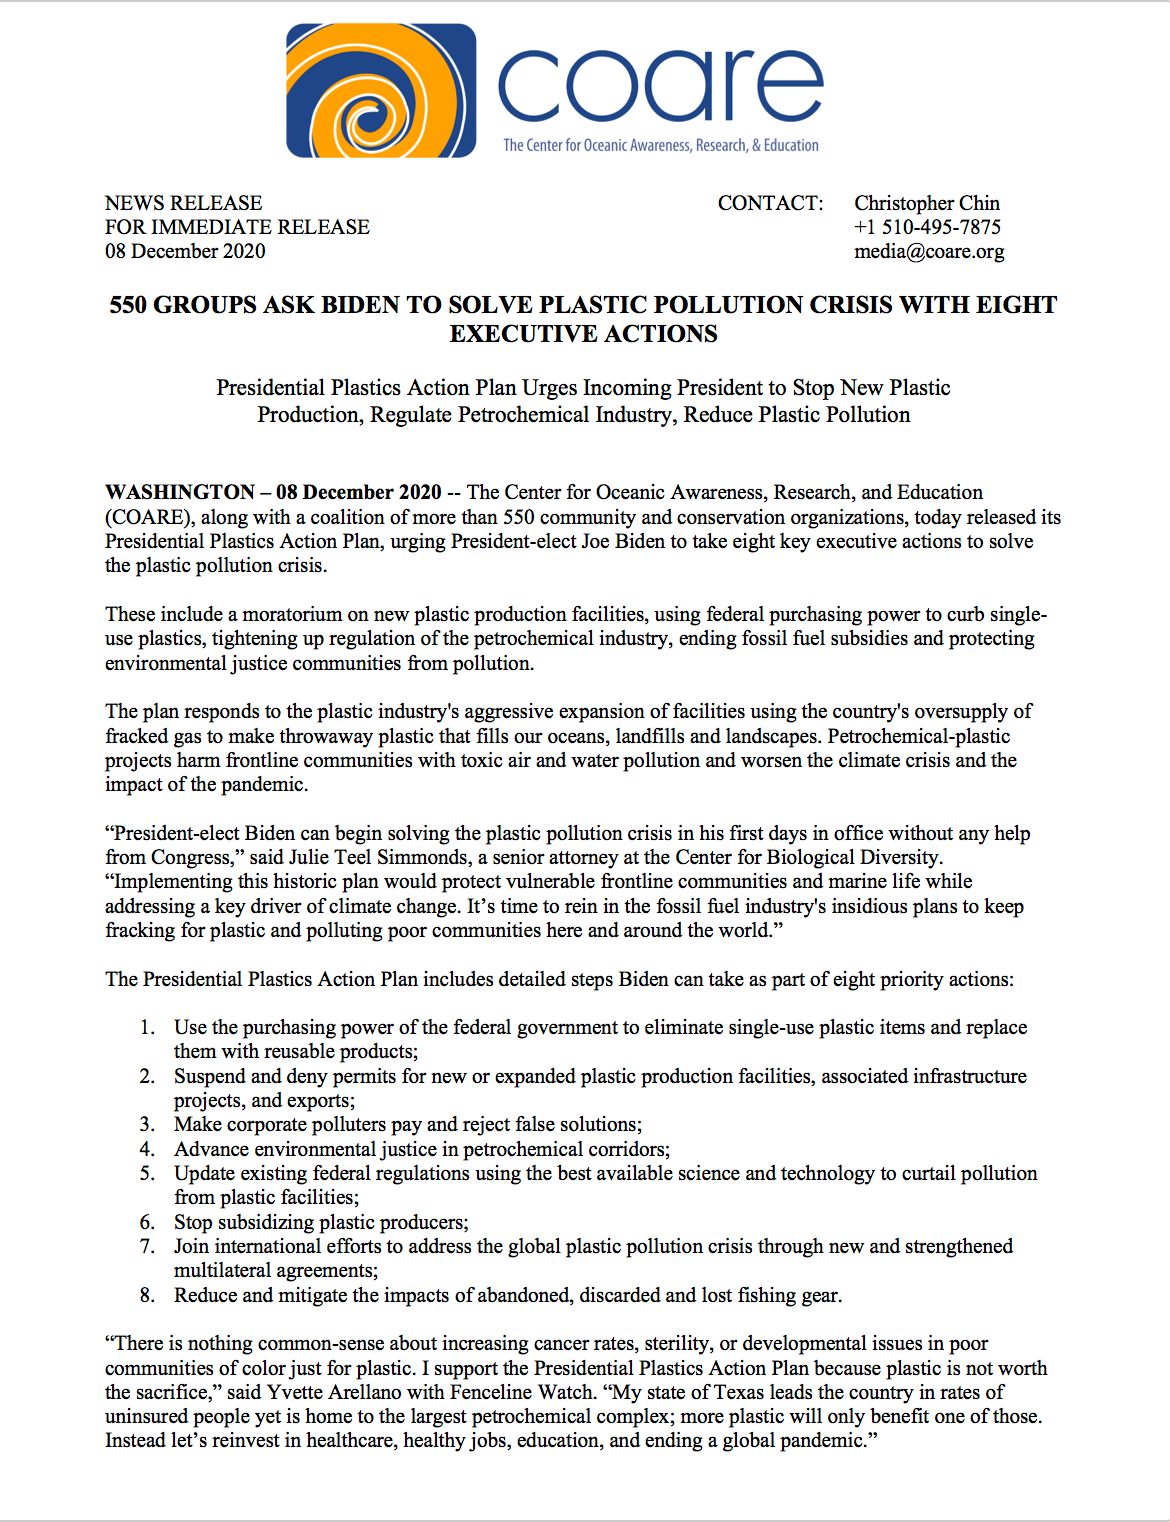 Presidential Plastic Action Plan Press Release